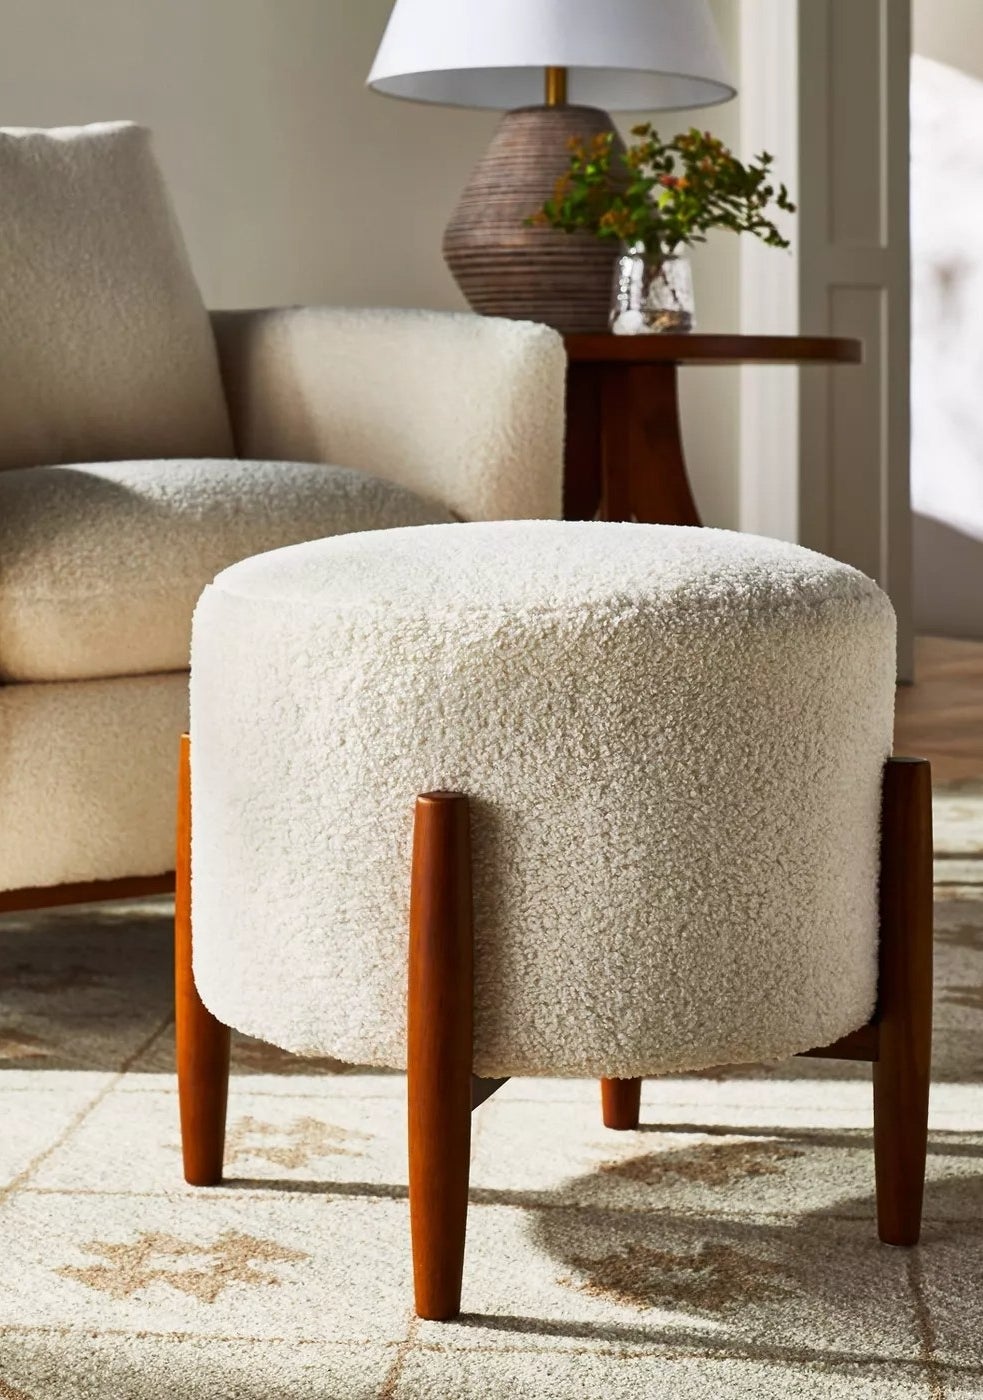 The ottoman with brown wood legs